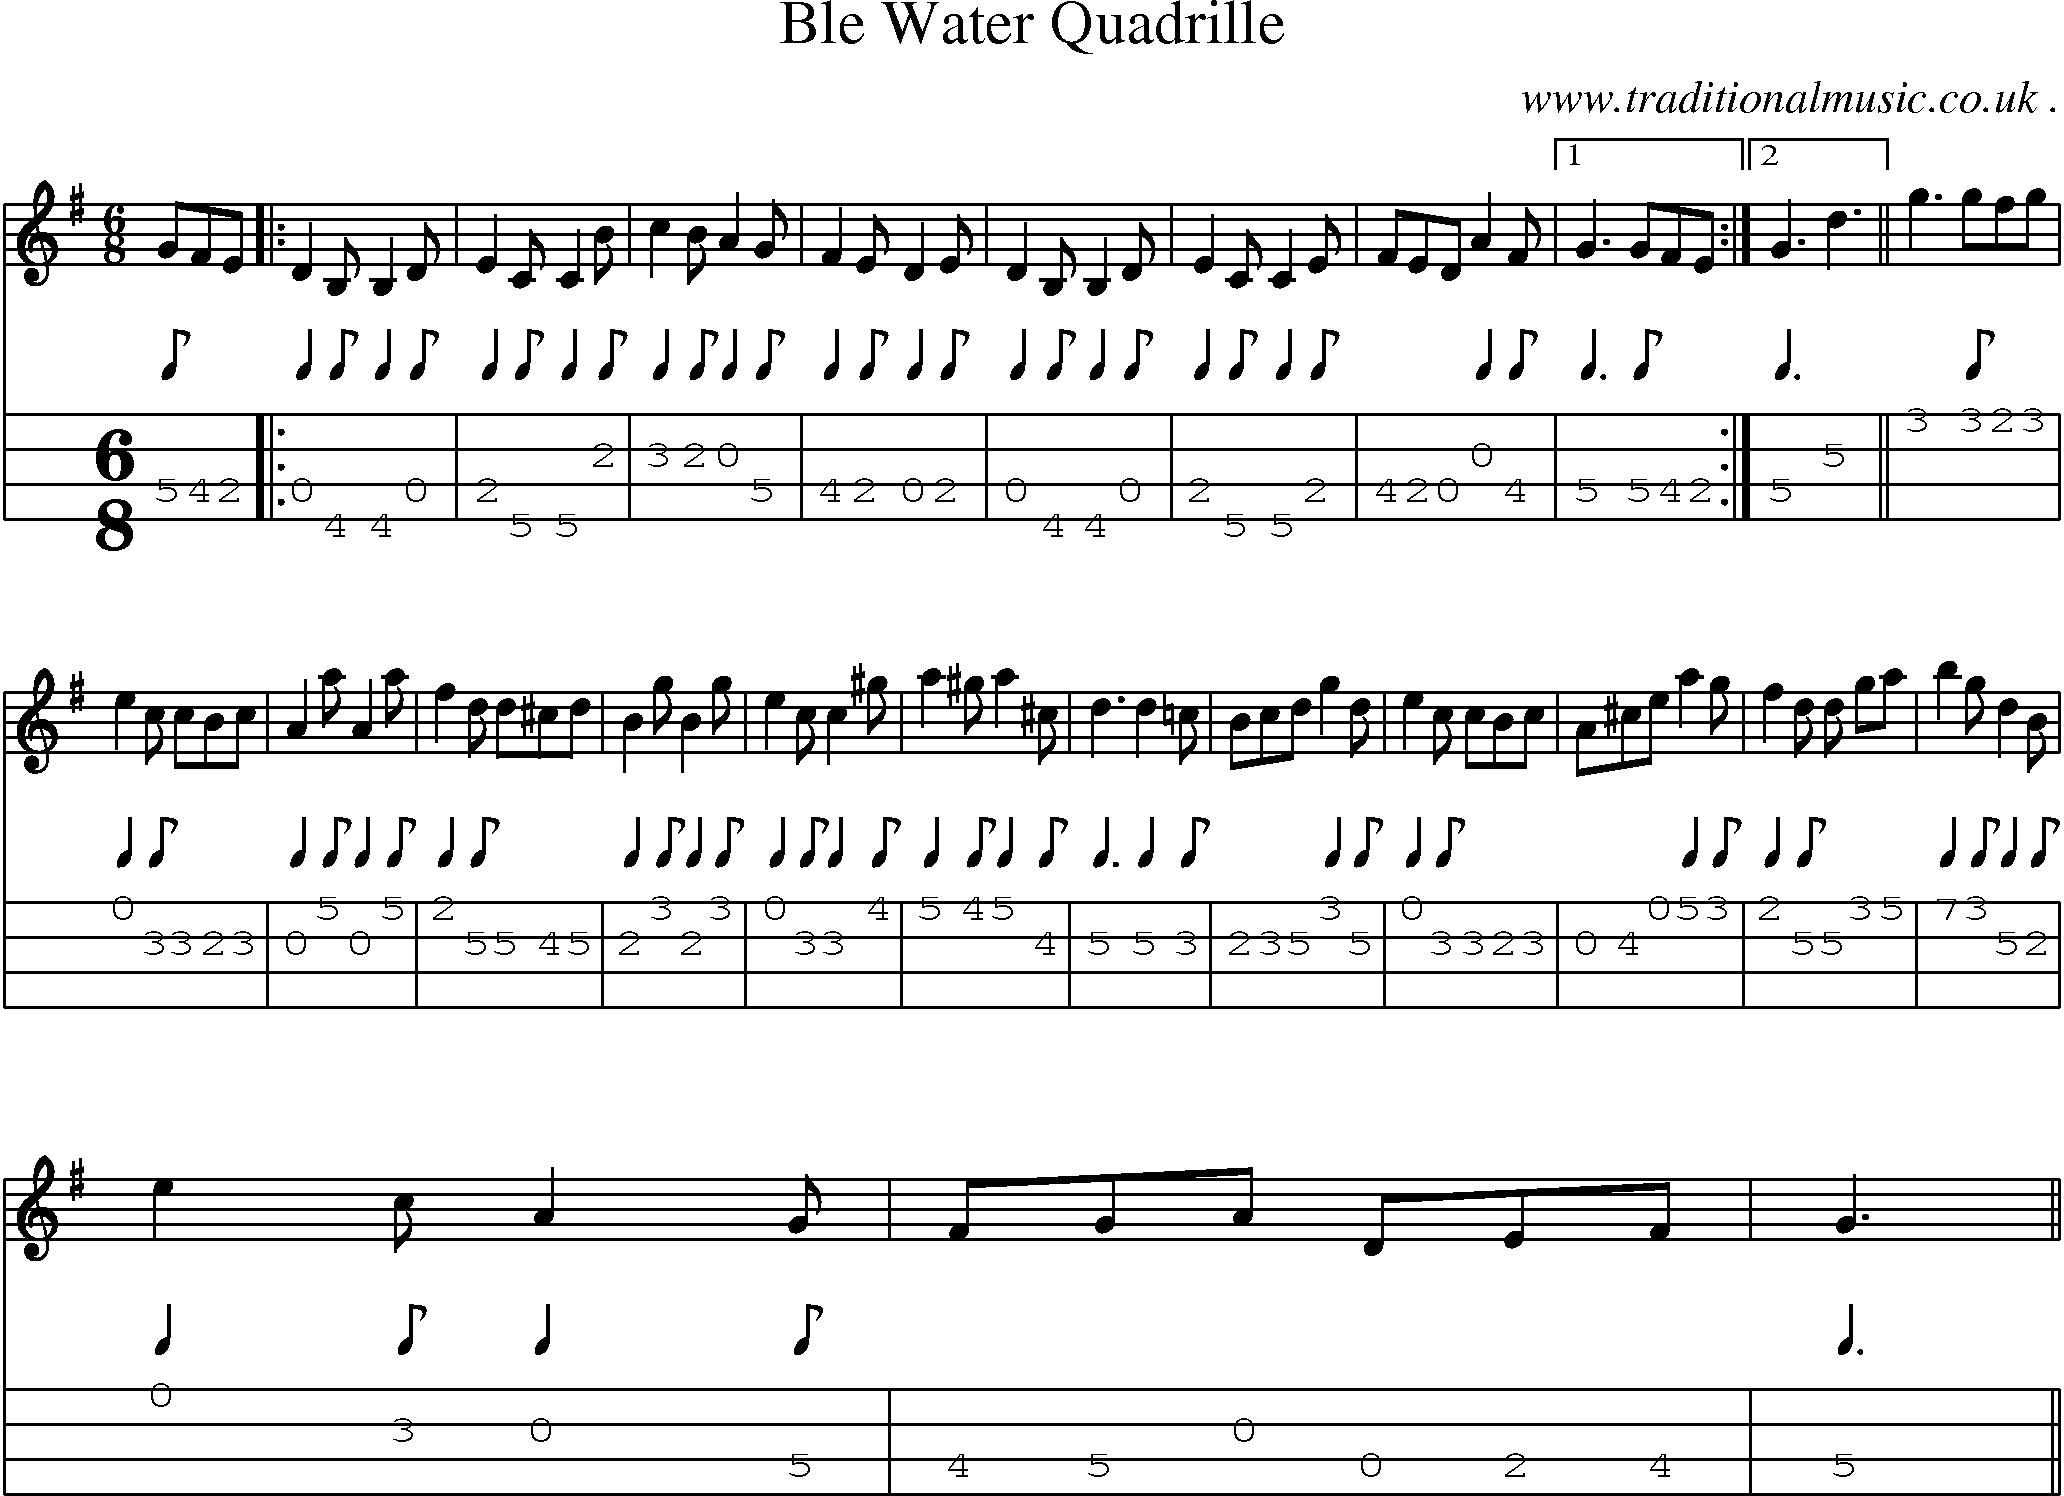 Sheet-Music and Mandolin Tabs for Ble Water Quadrille